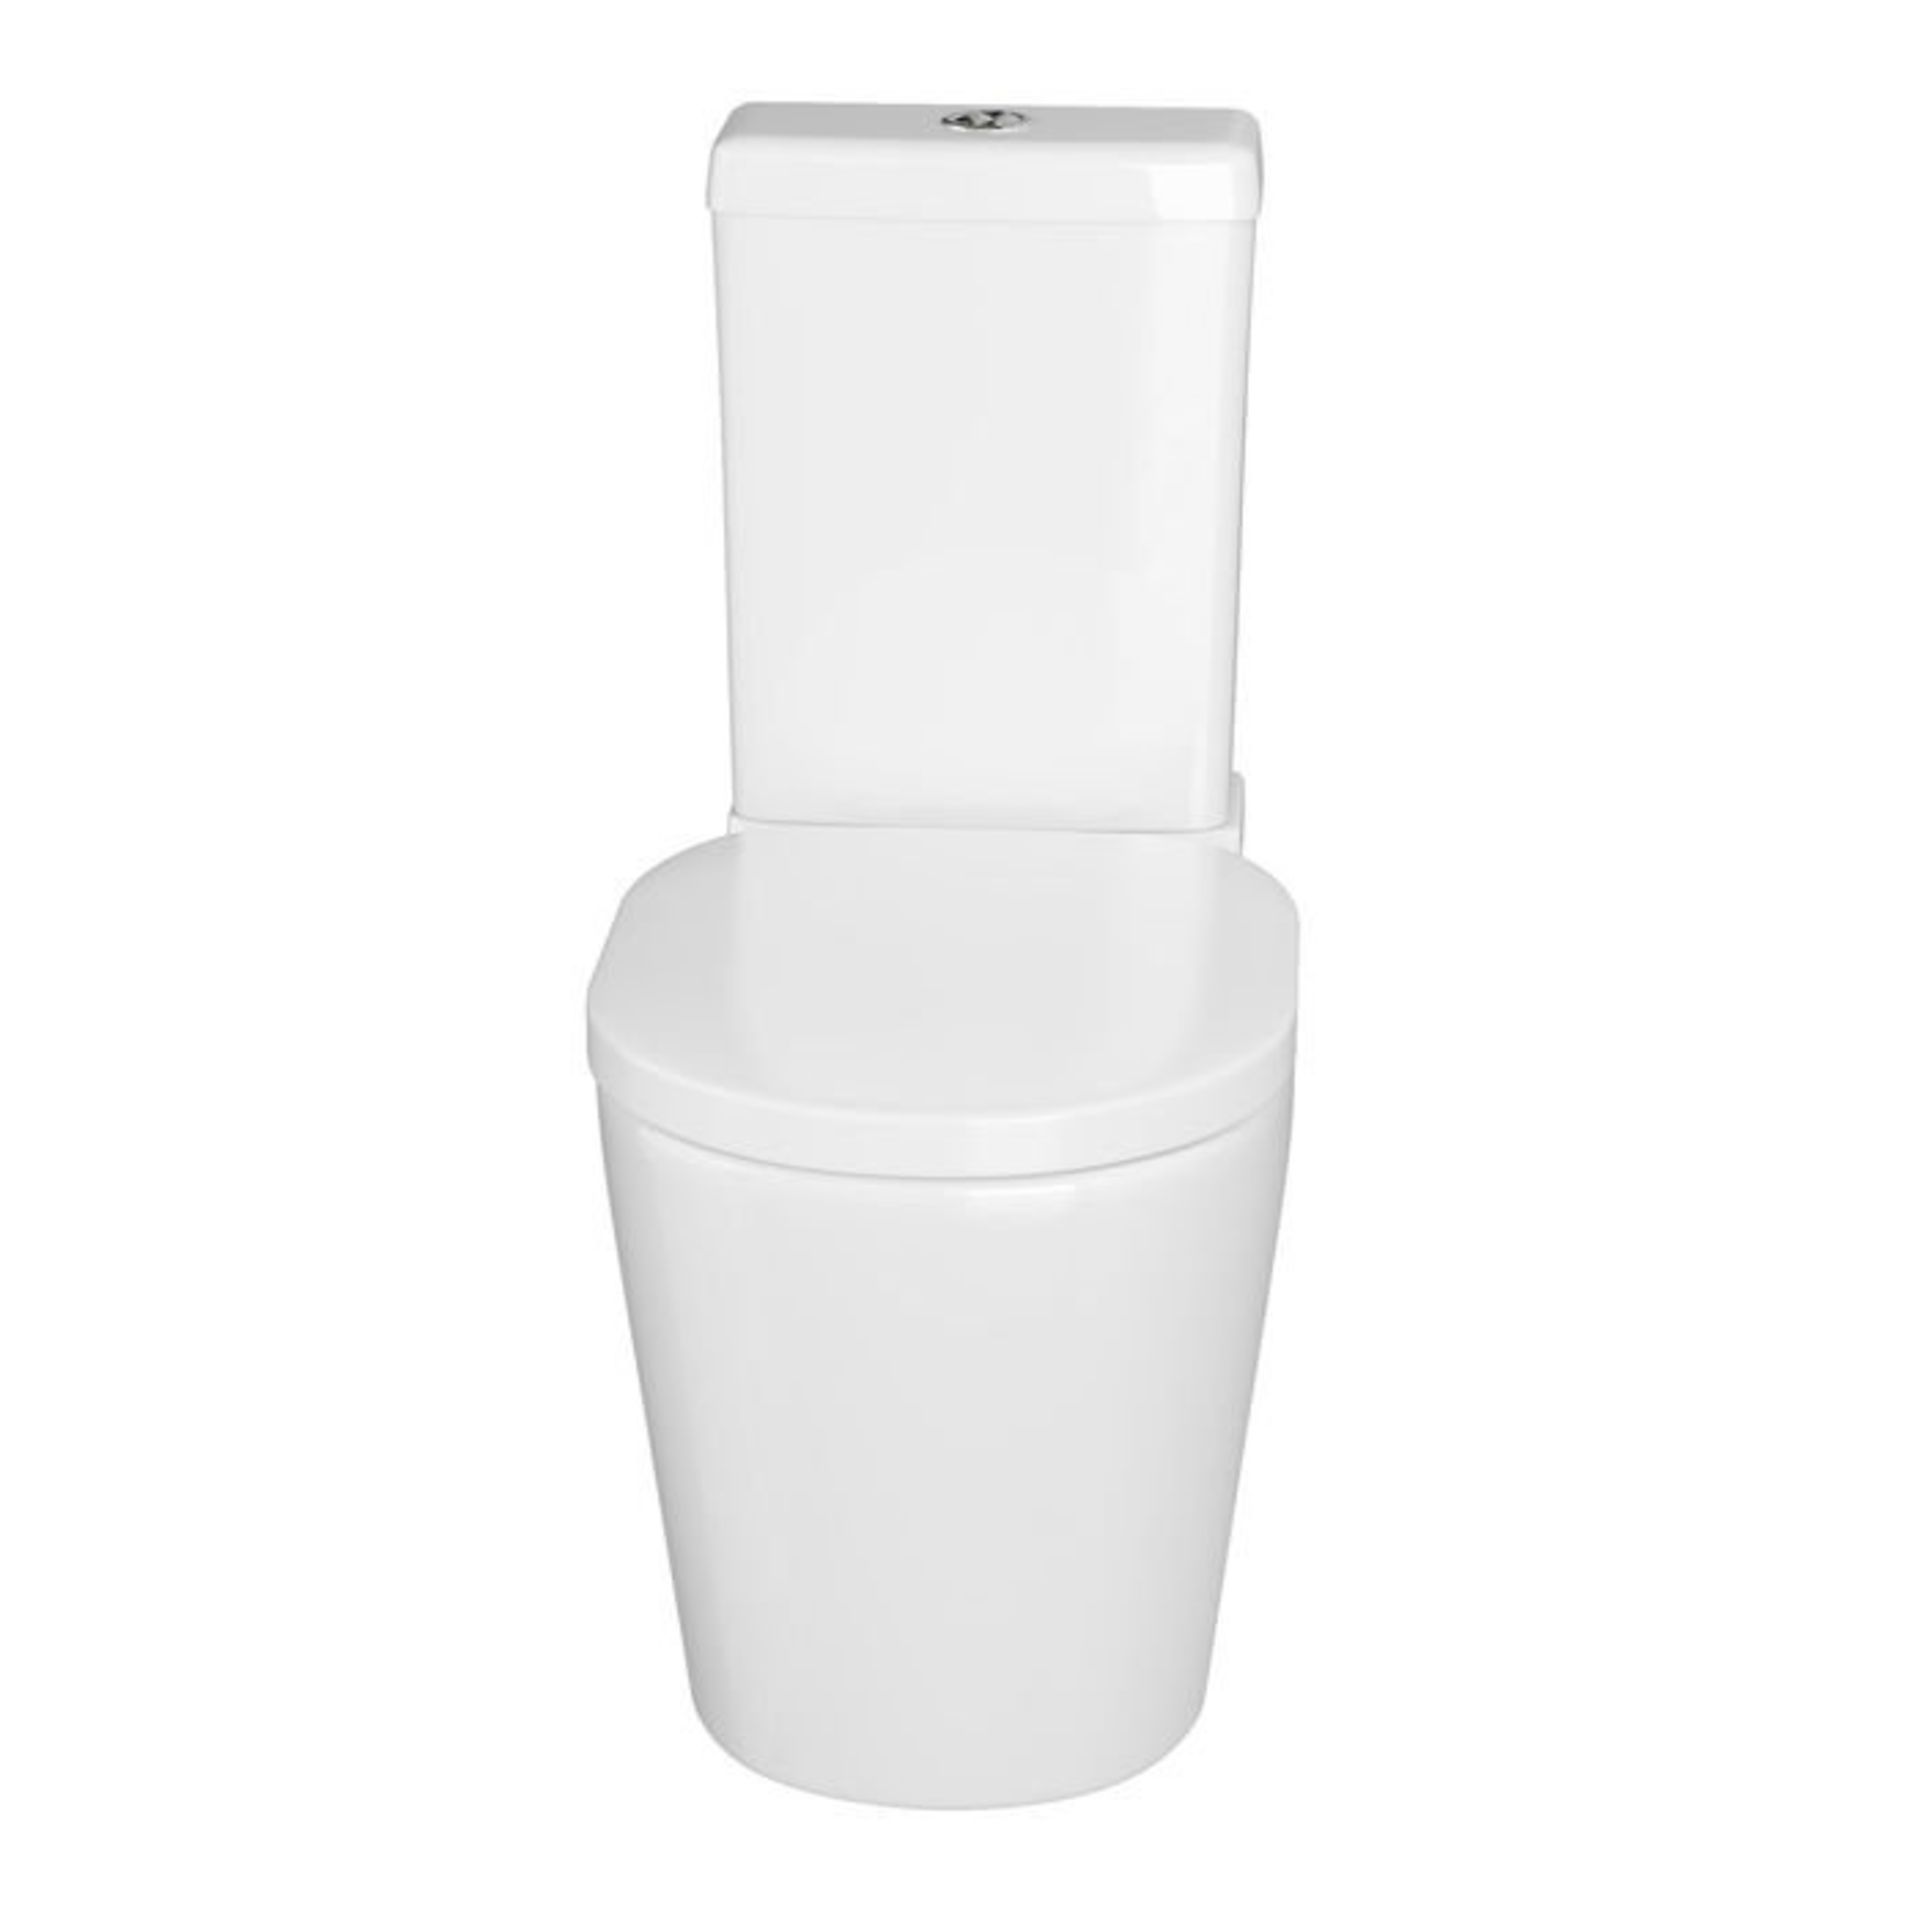 (G14) Albi Close Coupled Toilet & Cistern inc Soft Close Seat RRP £349.99 This innovative toilet - Image 4 of 4